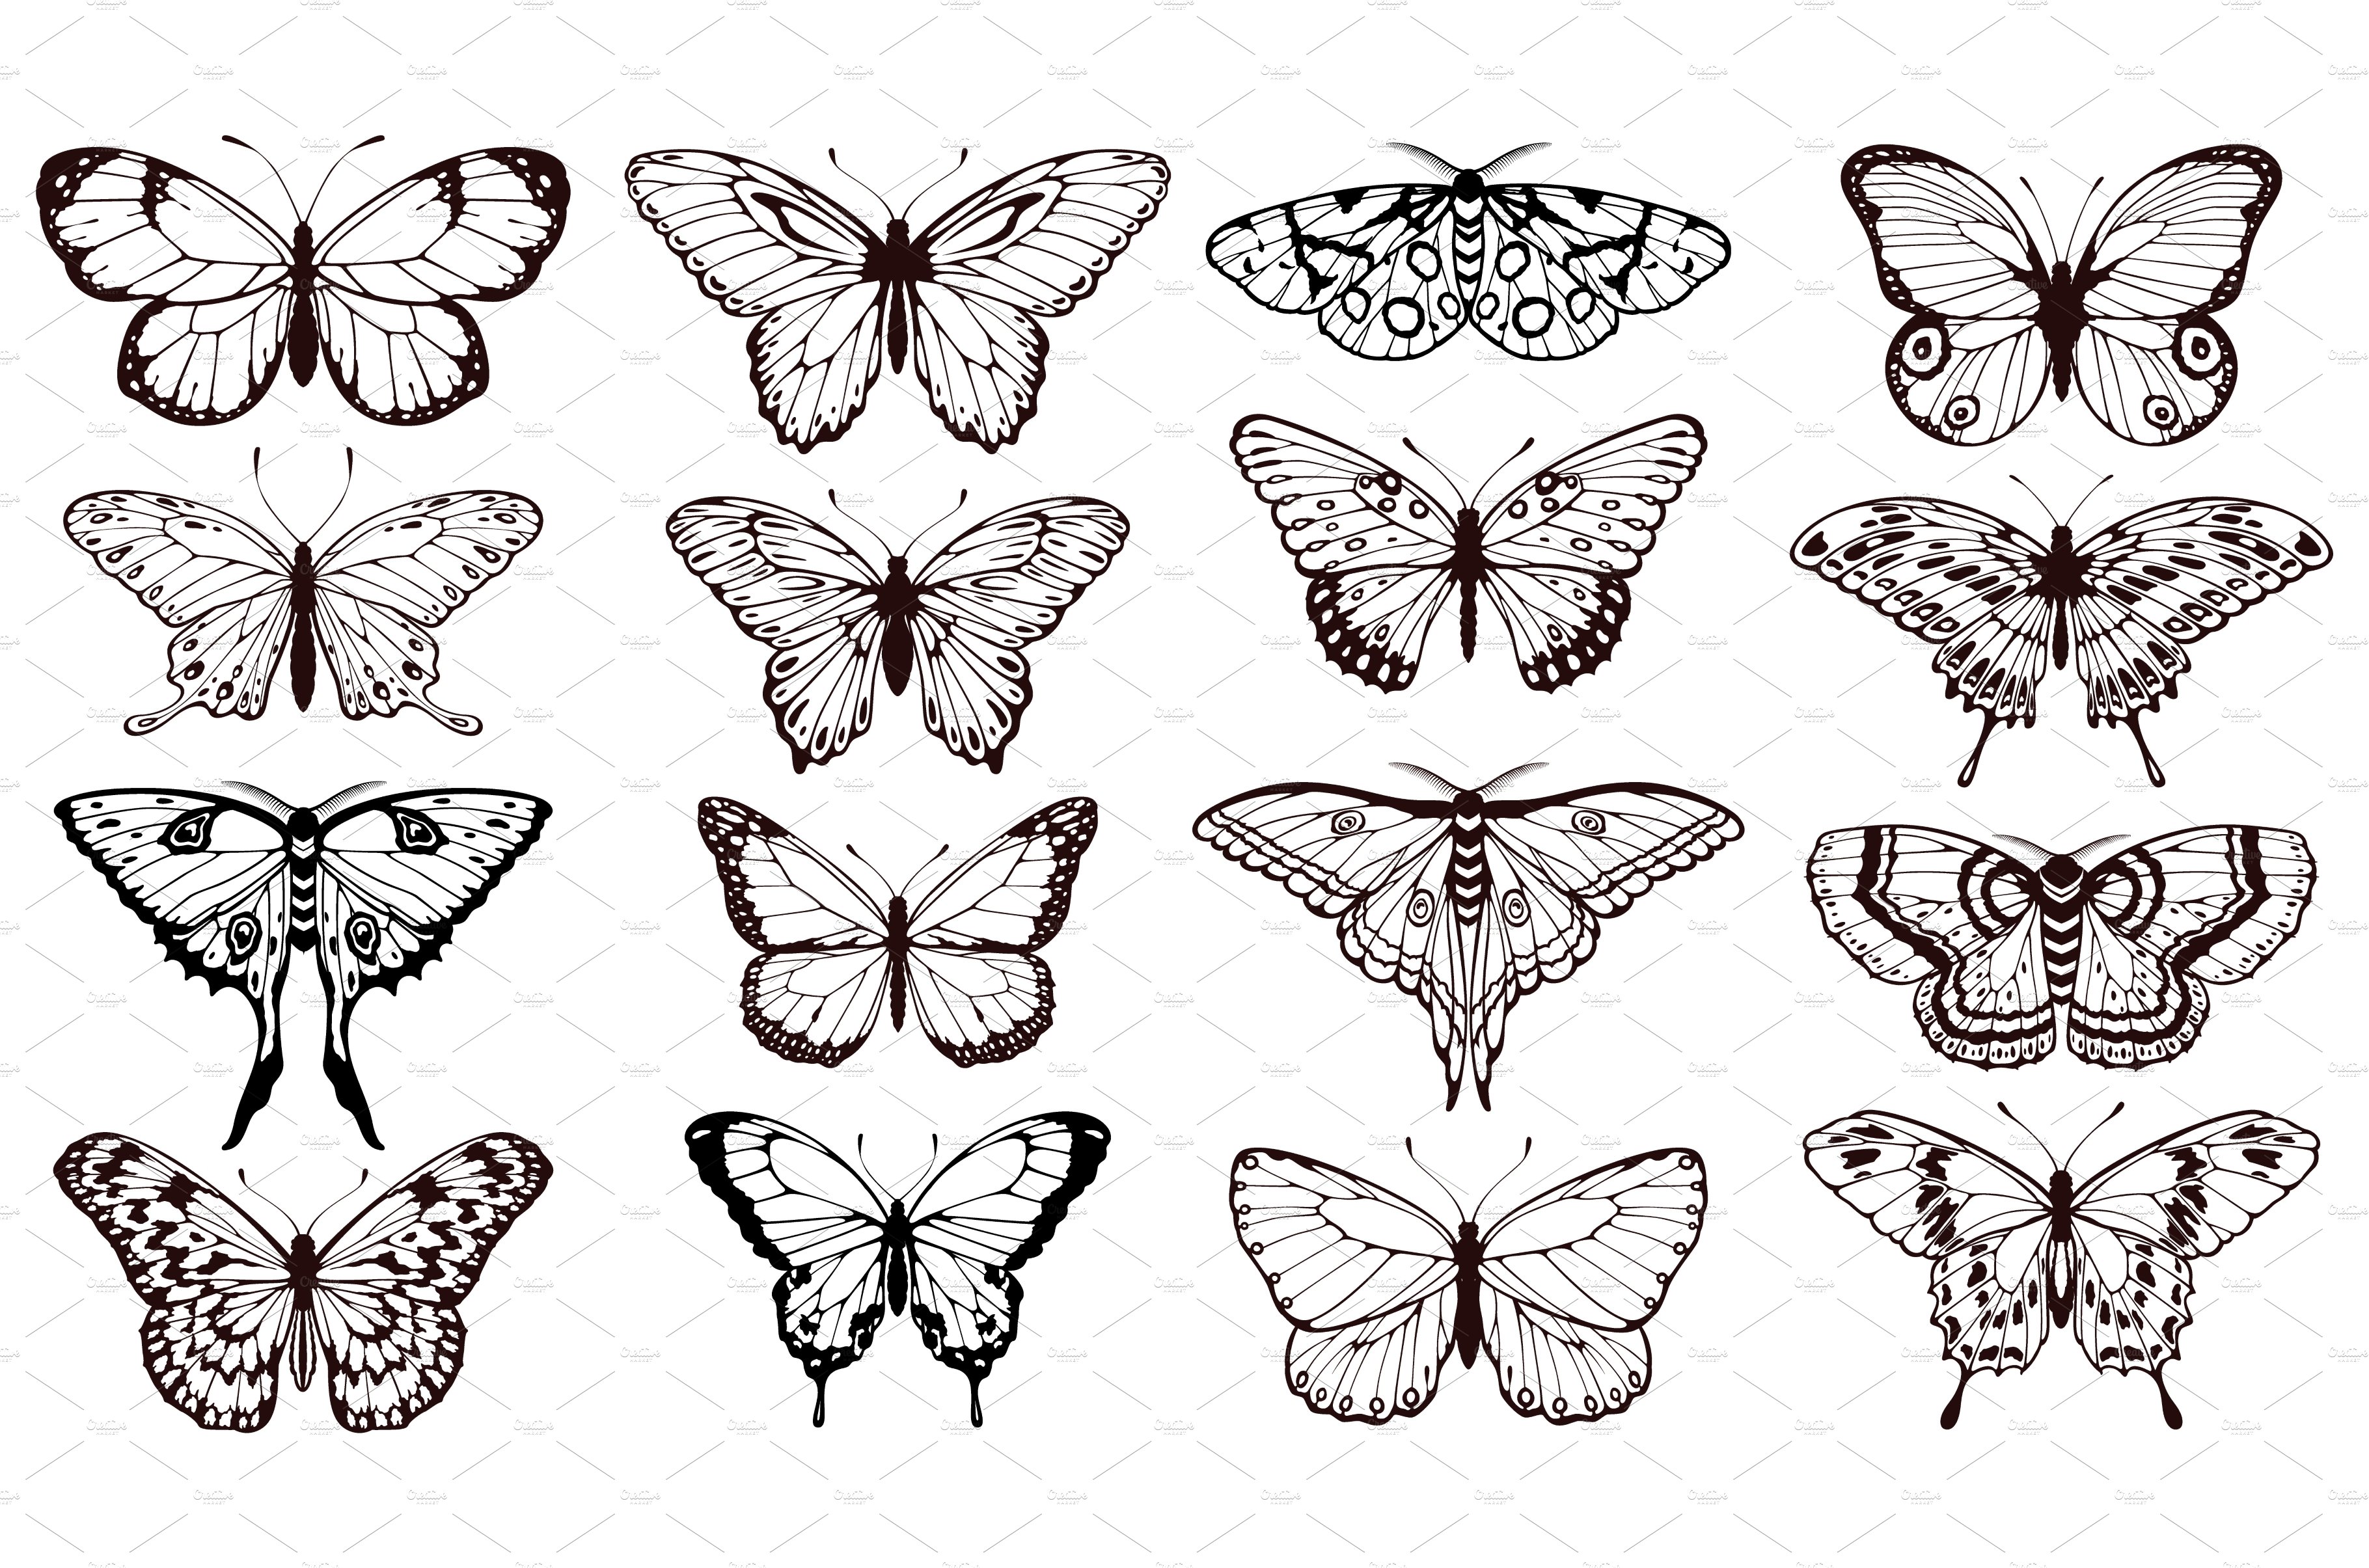 Butterfly silhouettes. Black outline cover image.